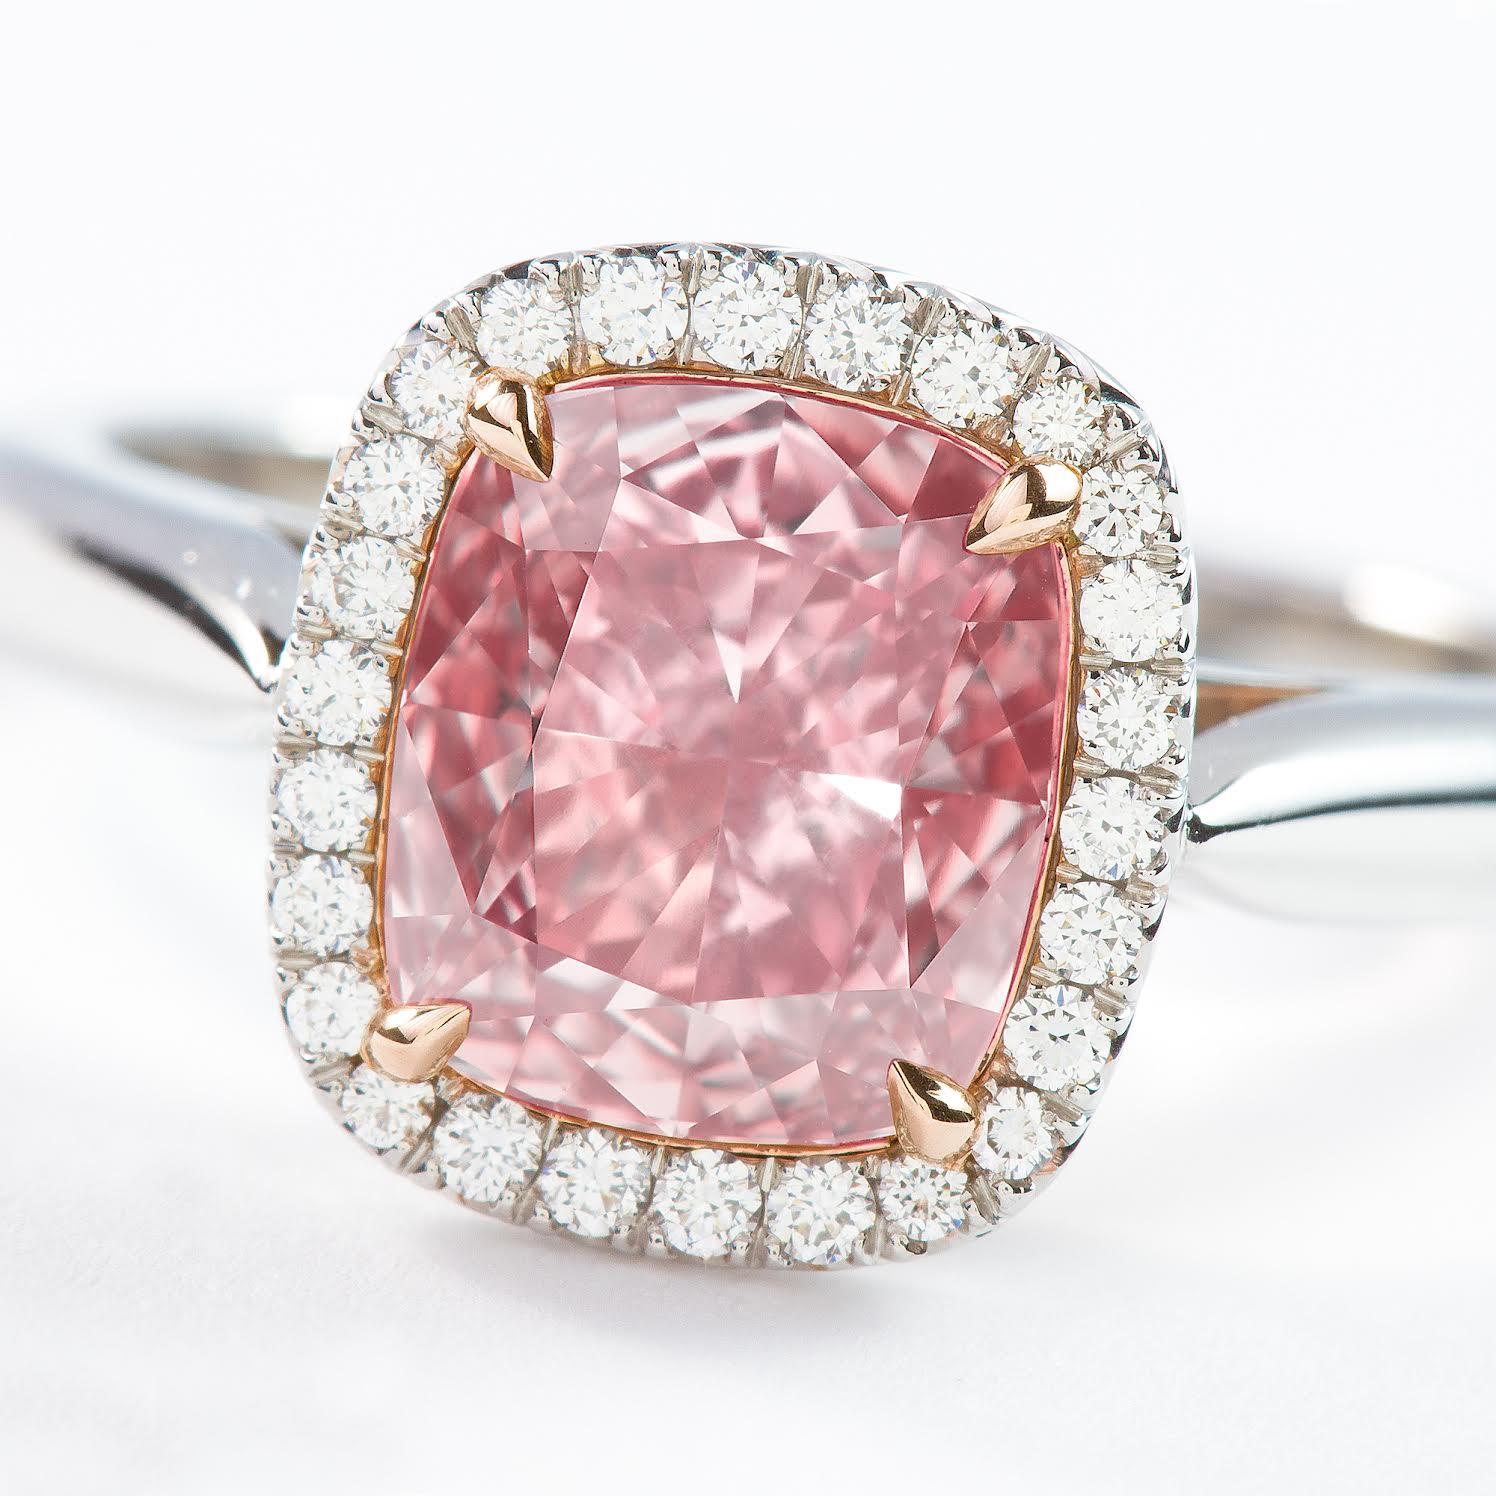 Issac Nussbaum 2.02 Carat Pink Diamond Engagement Ring In New Condition For Sale In New York, NY